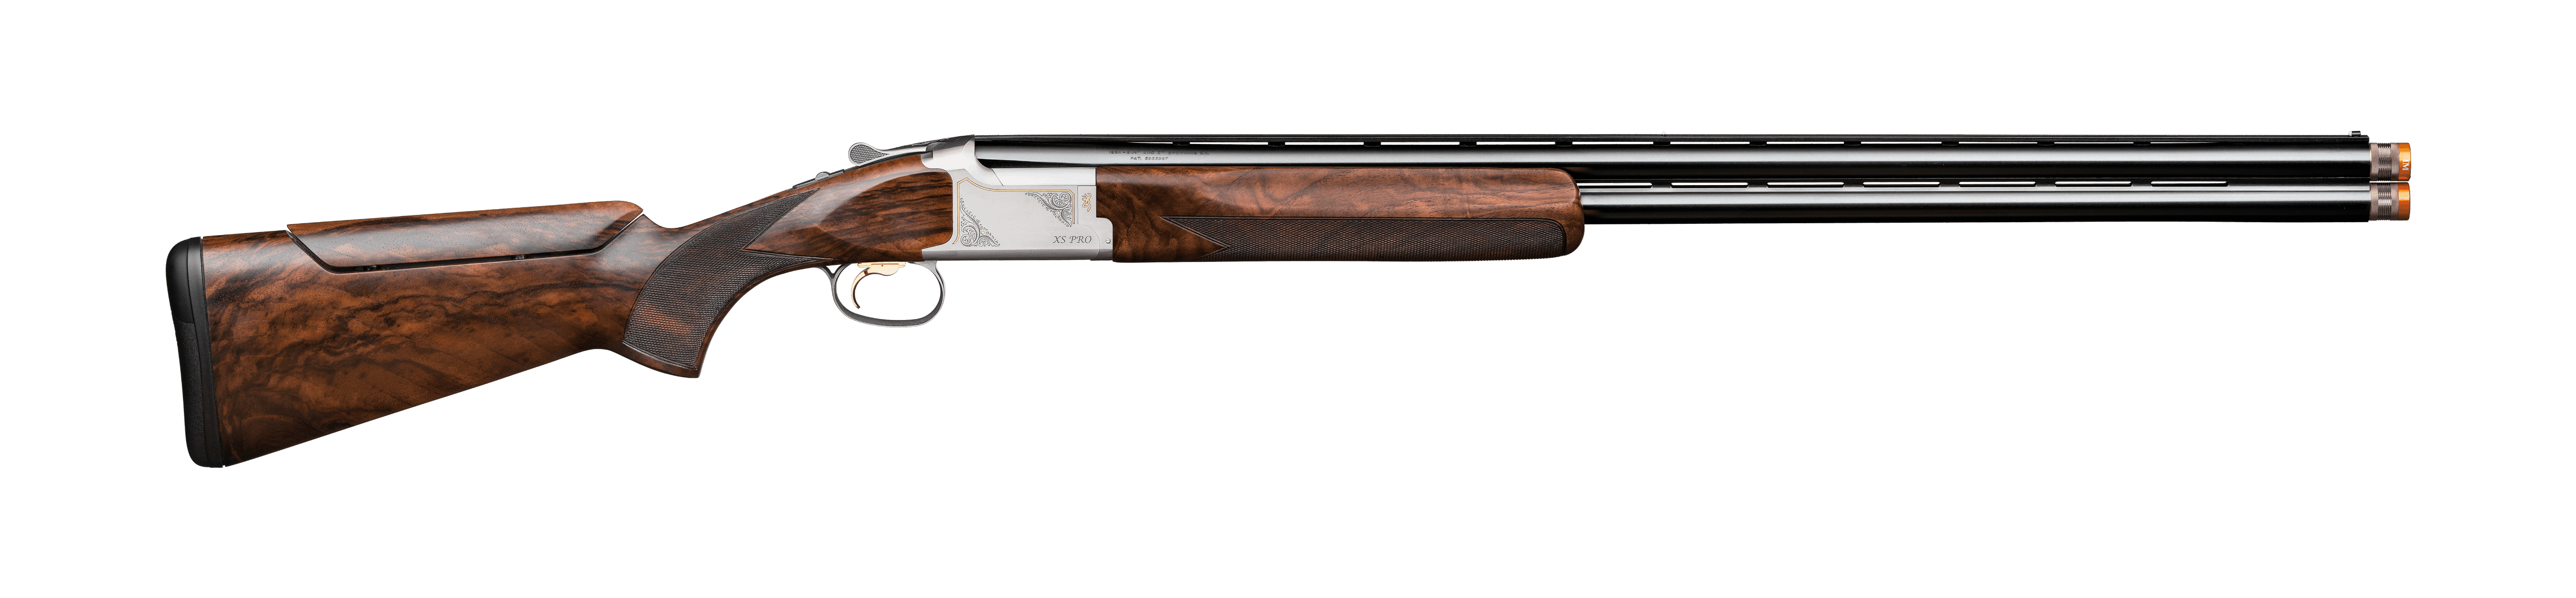 BAR Action in Straight Pull Elegance - The Browning Maral -The